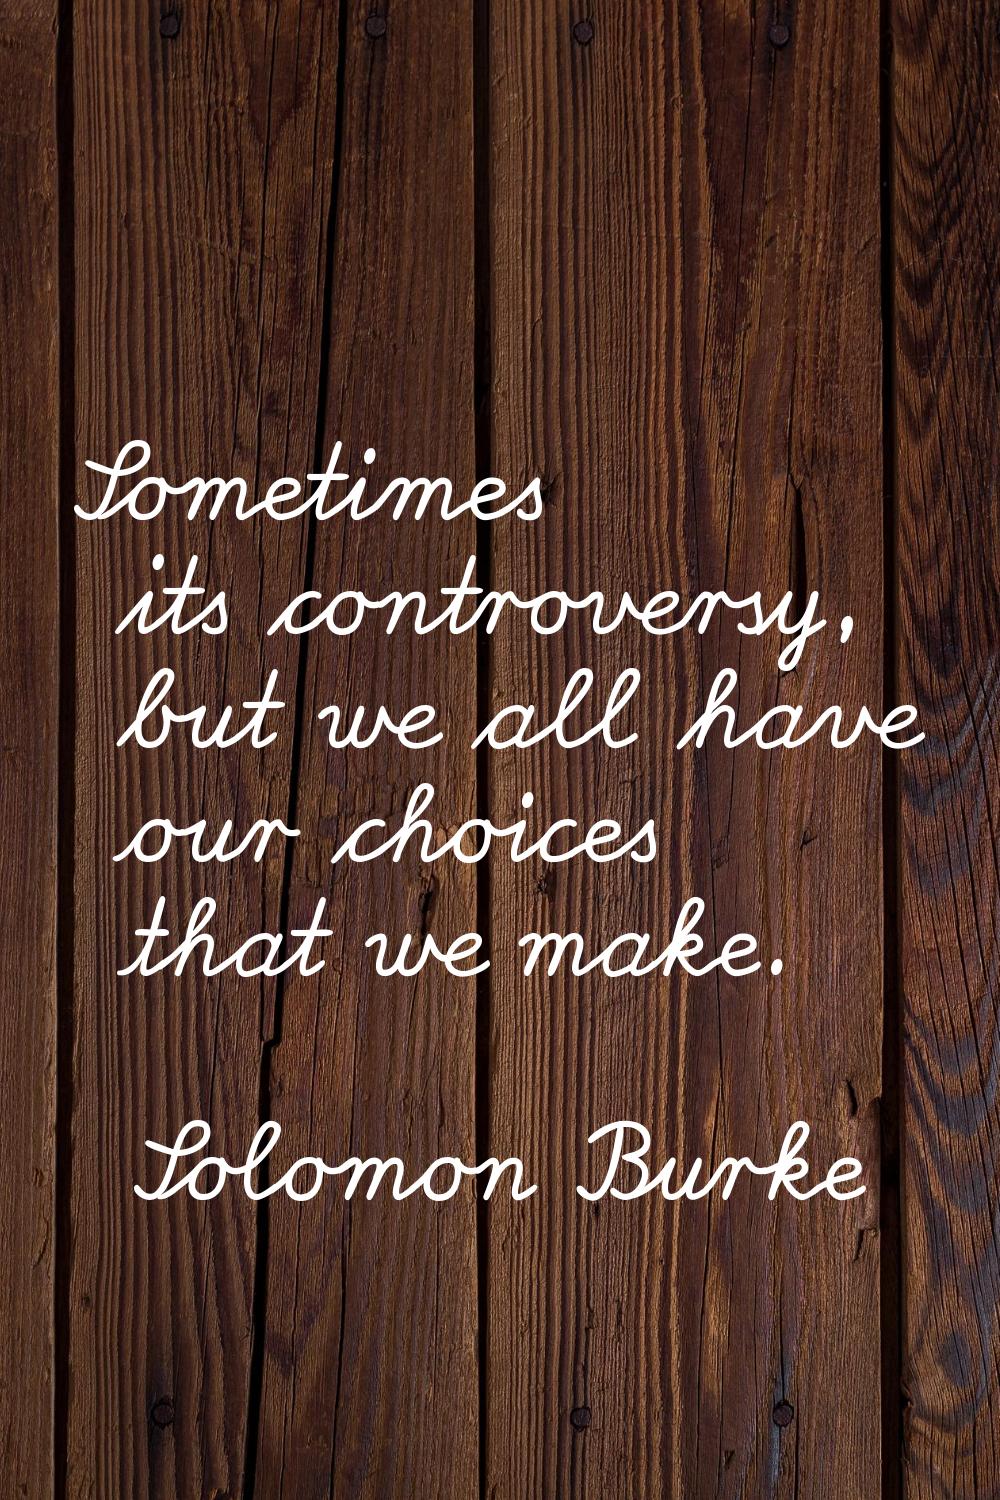 Sometimes its controversy, but we all have our choices that we make.